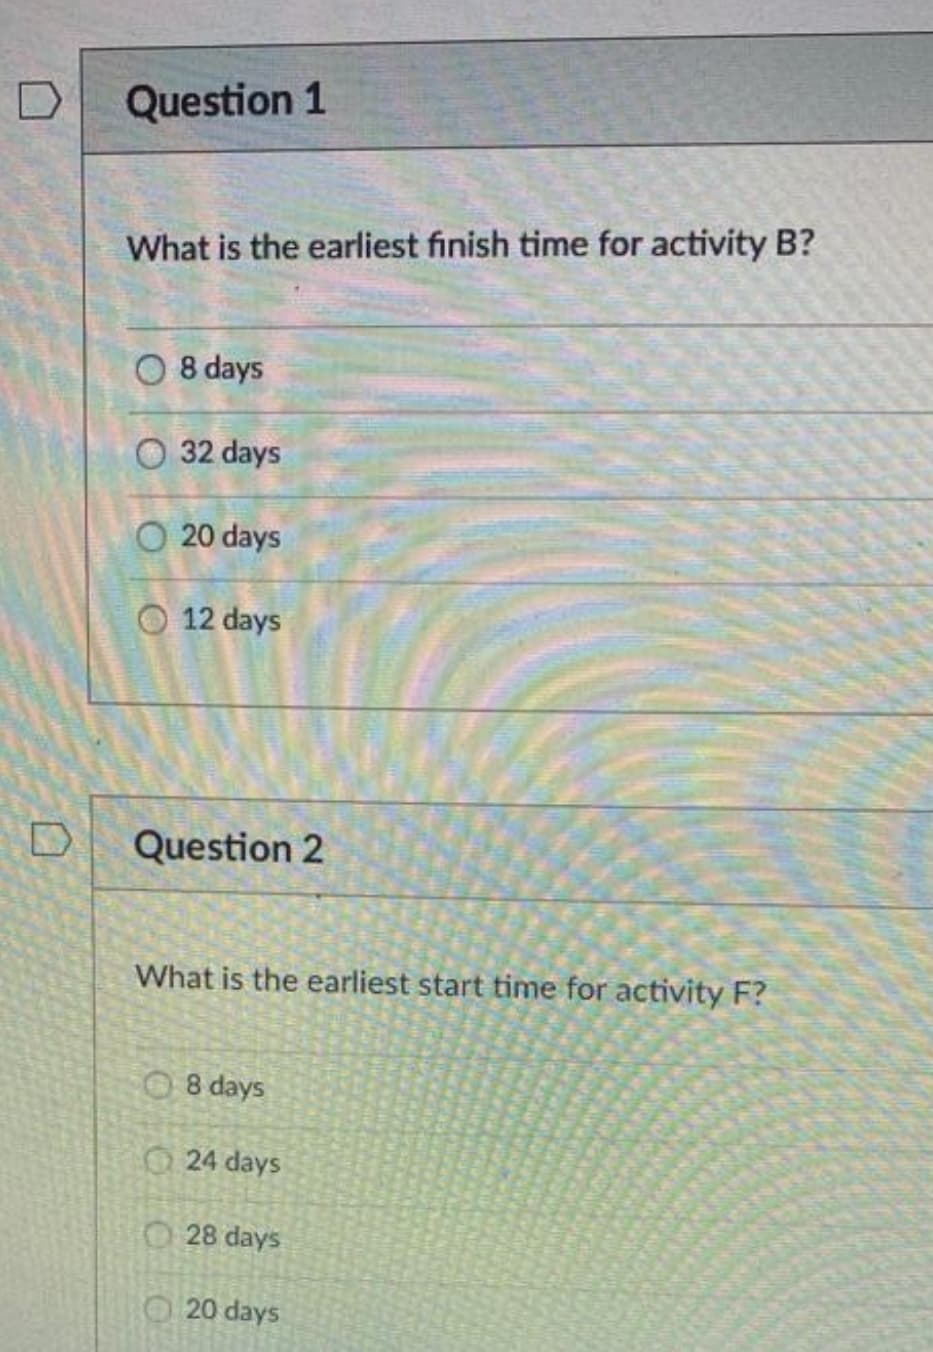 Question 1
What is the earliest finish time for activity B?
O 8 days
O 32 days
O 20 days
12 days
Question 2
What is the earliest start time for activity F?
O 8 days
24 days
O 28 days
20 days
